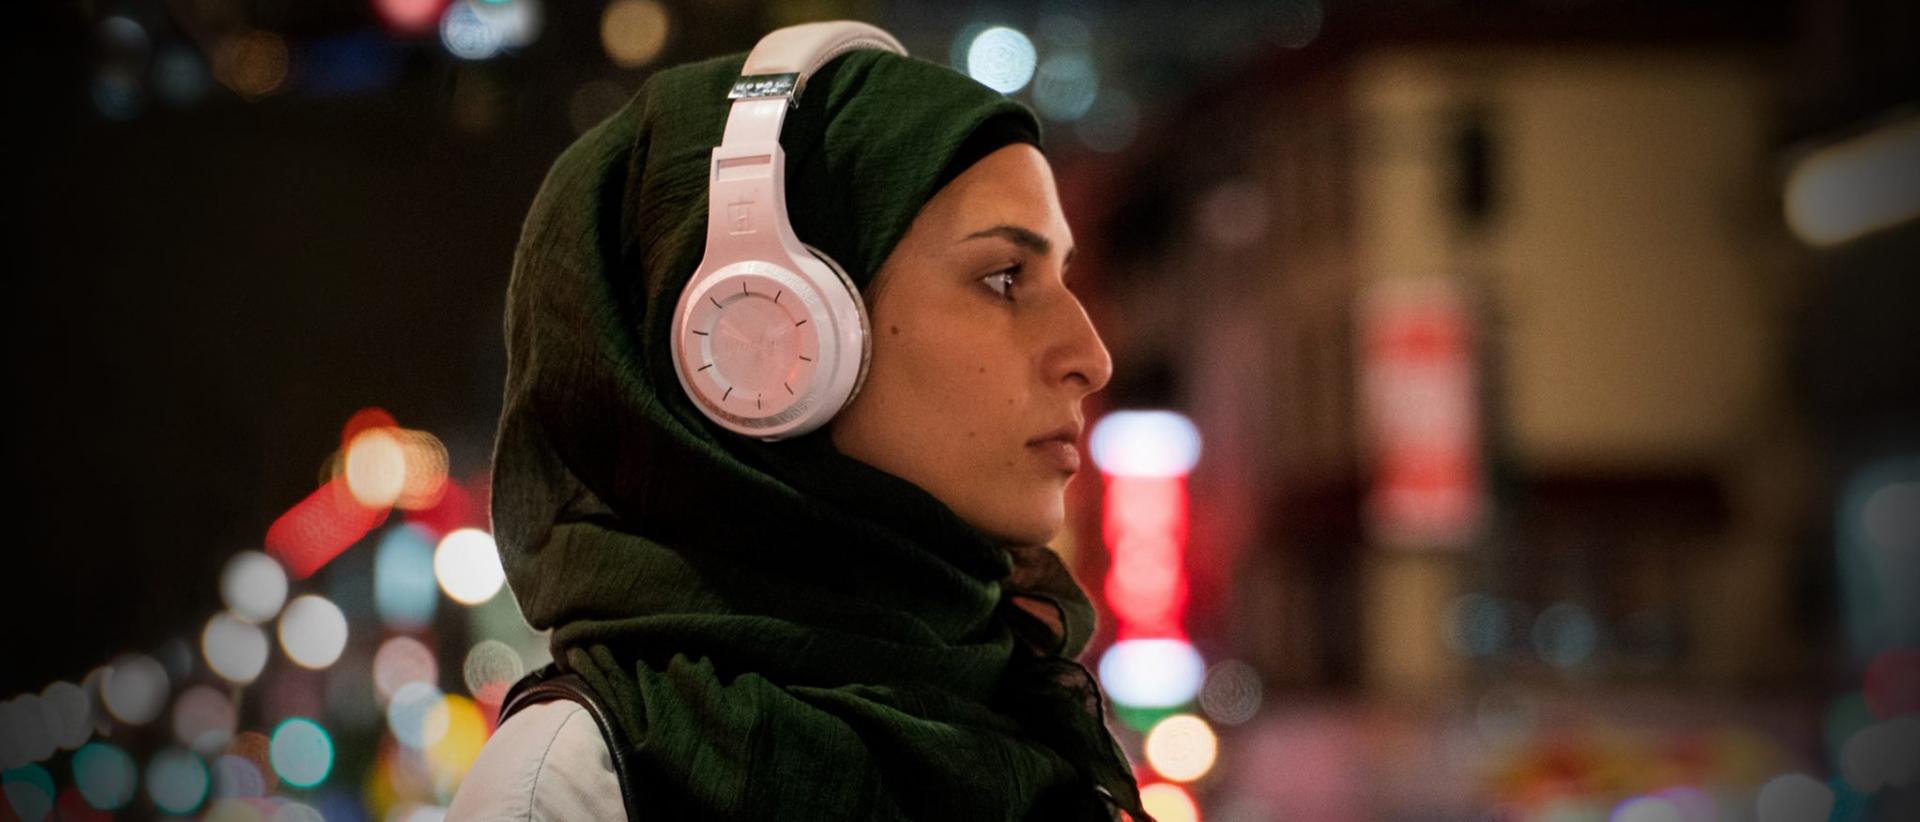 a young woman wearing a hijab and headphones walks through New York at night